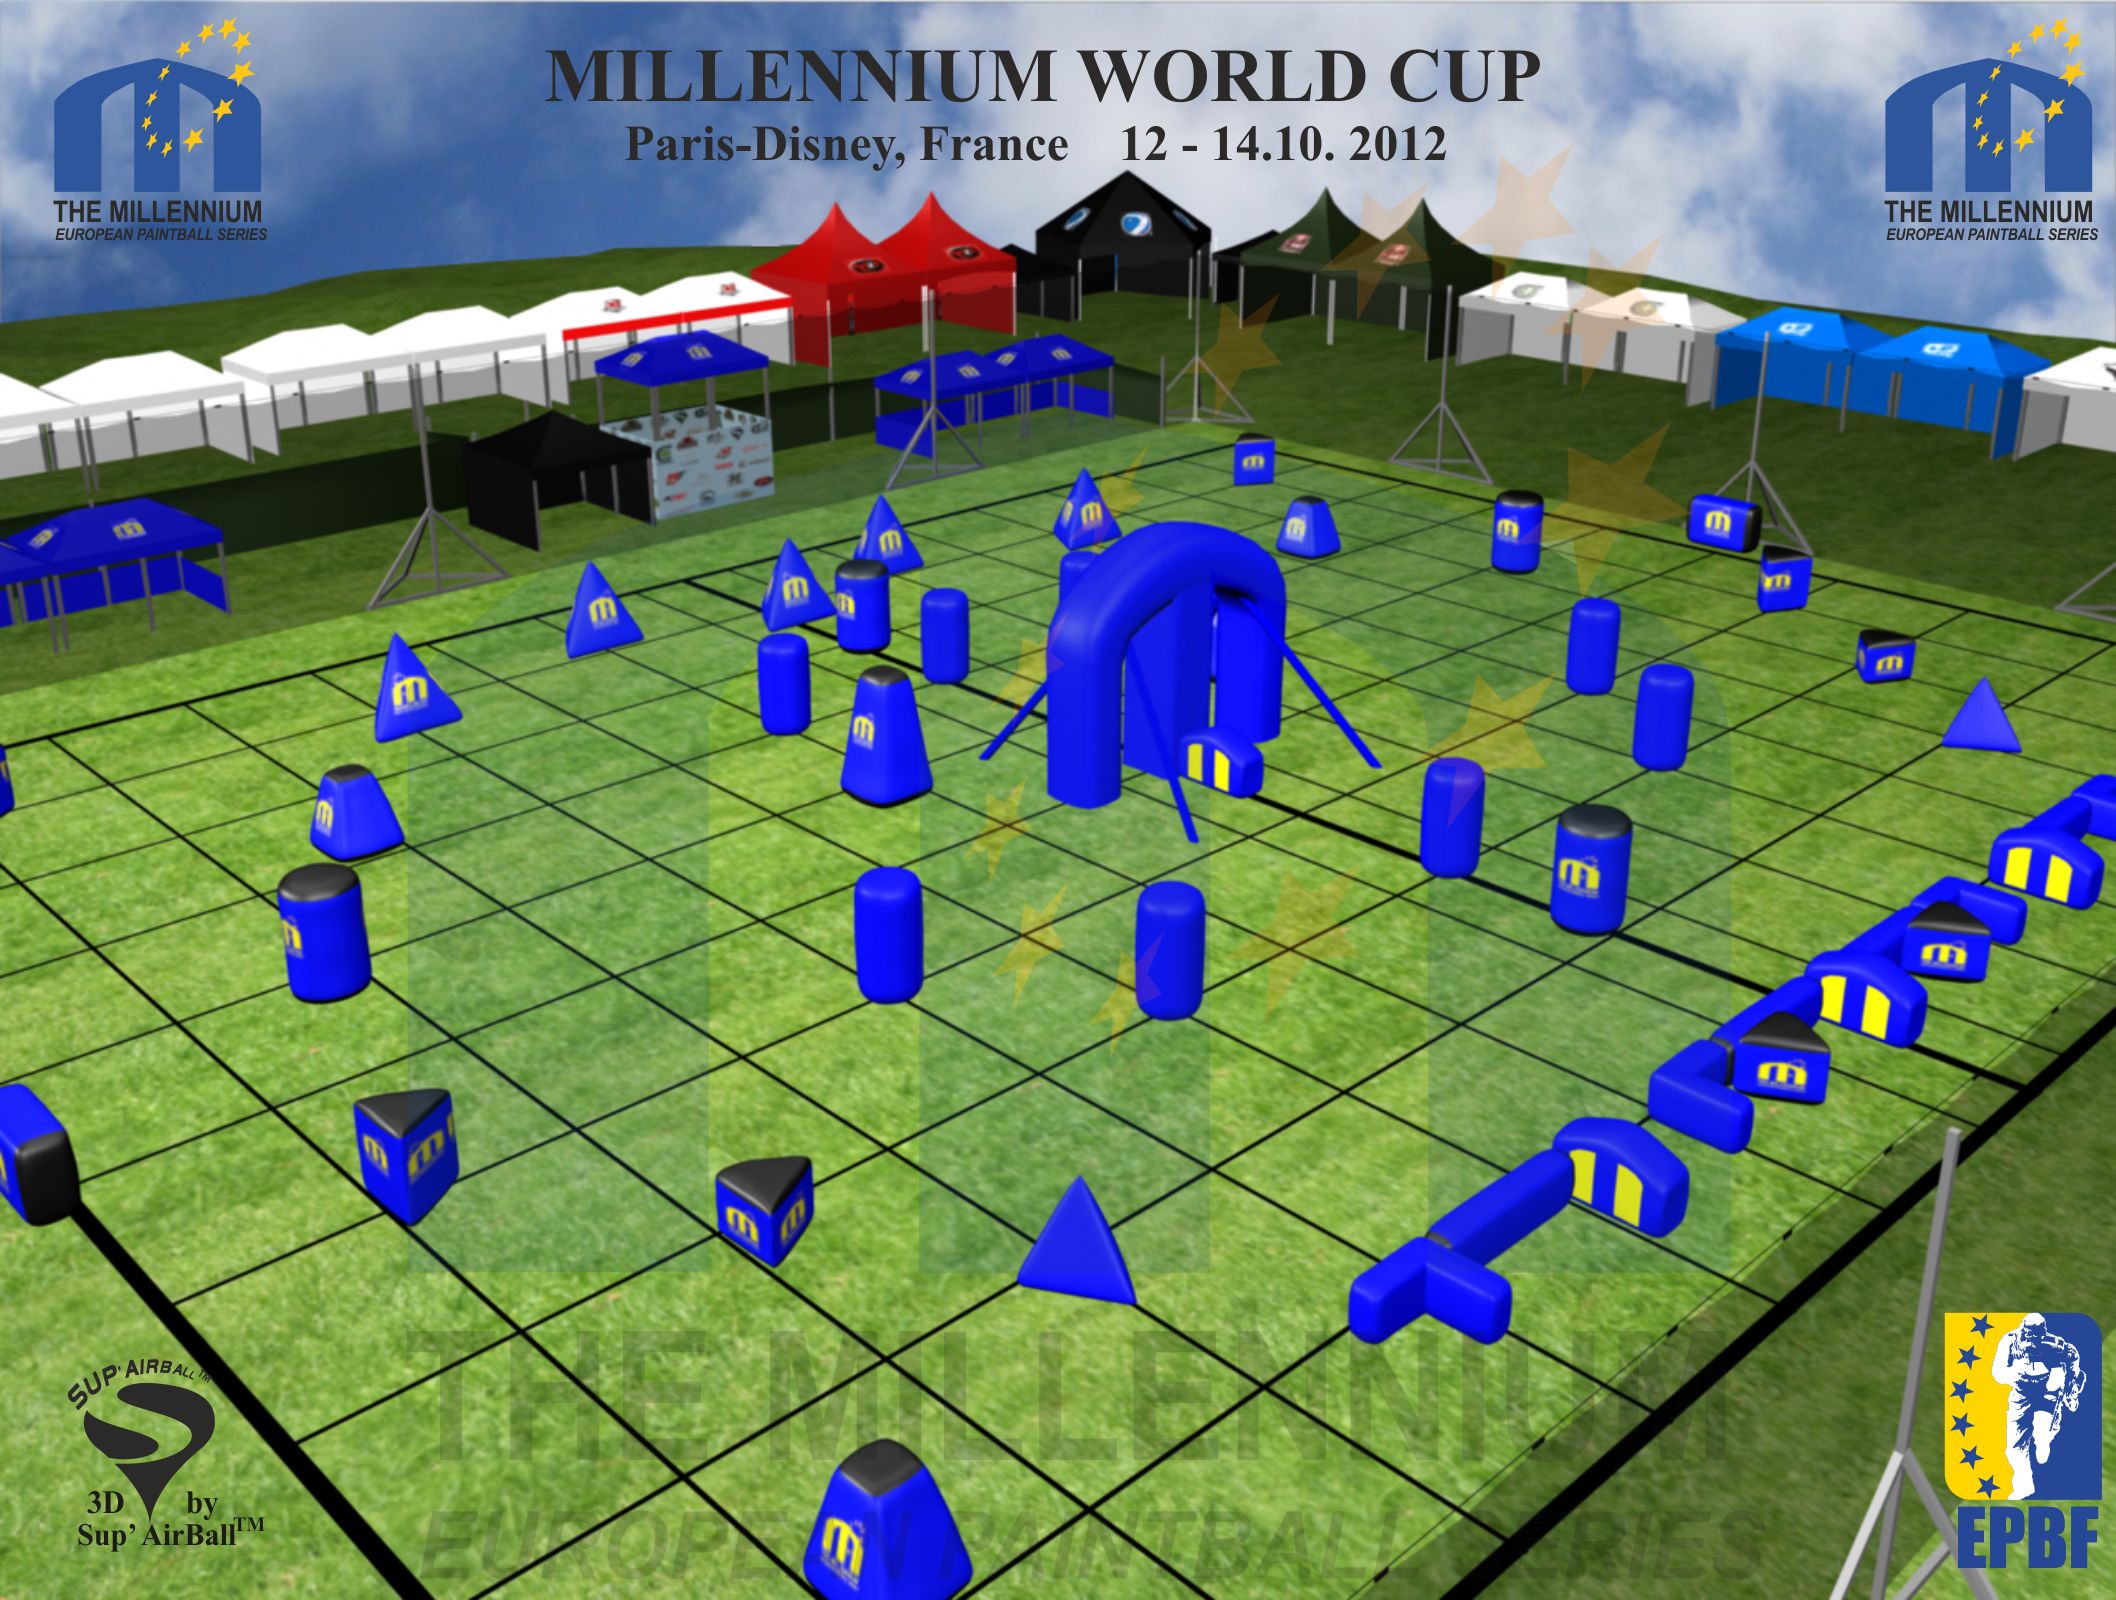 Millennium Paintball World Cup – 2012 Layout Revealed